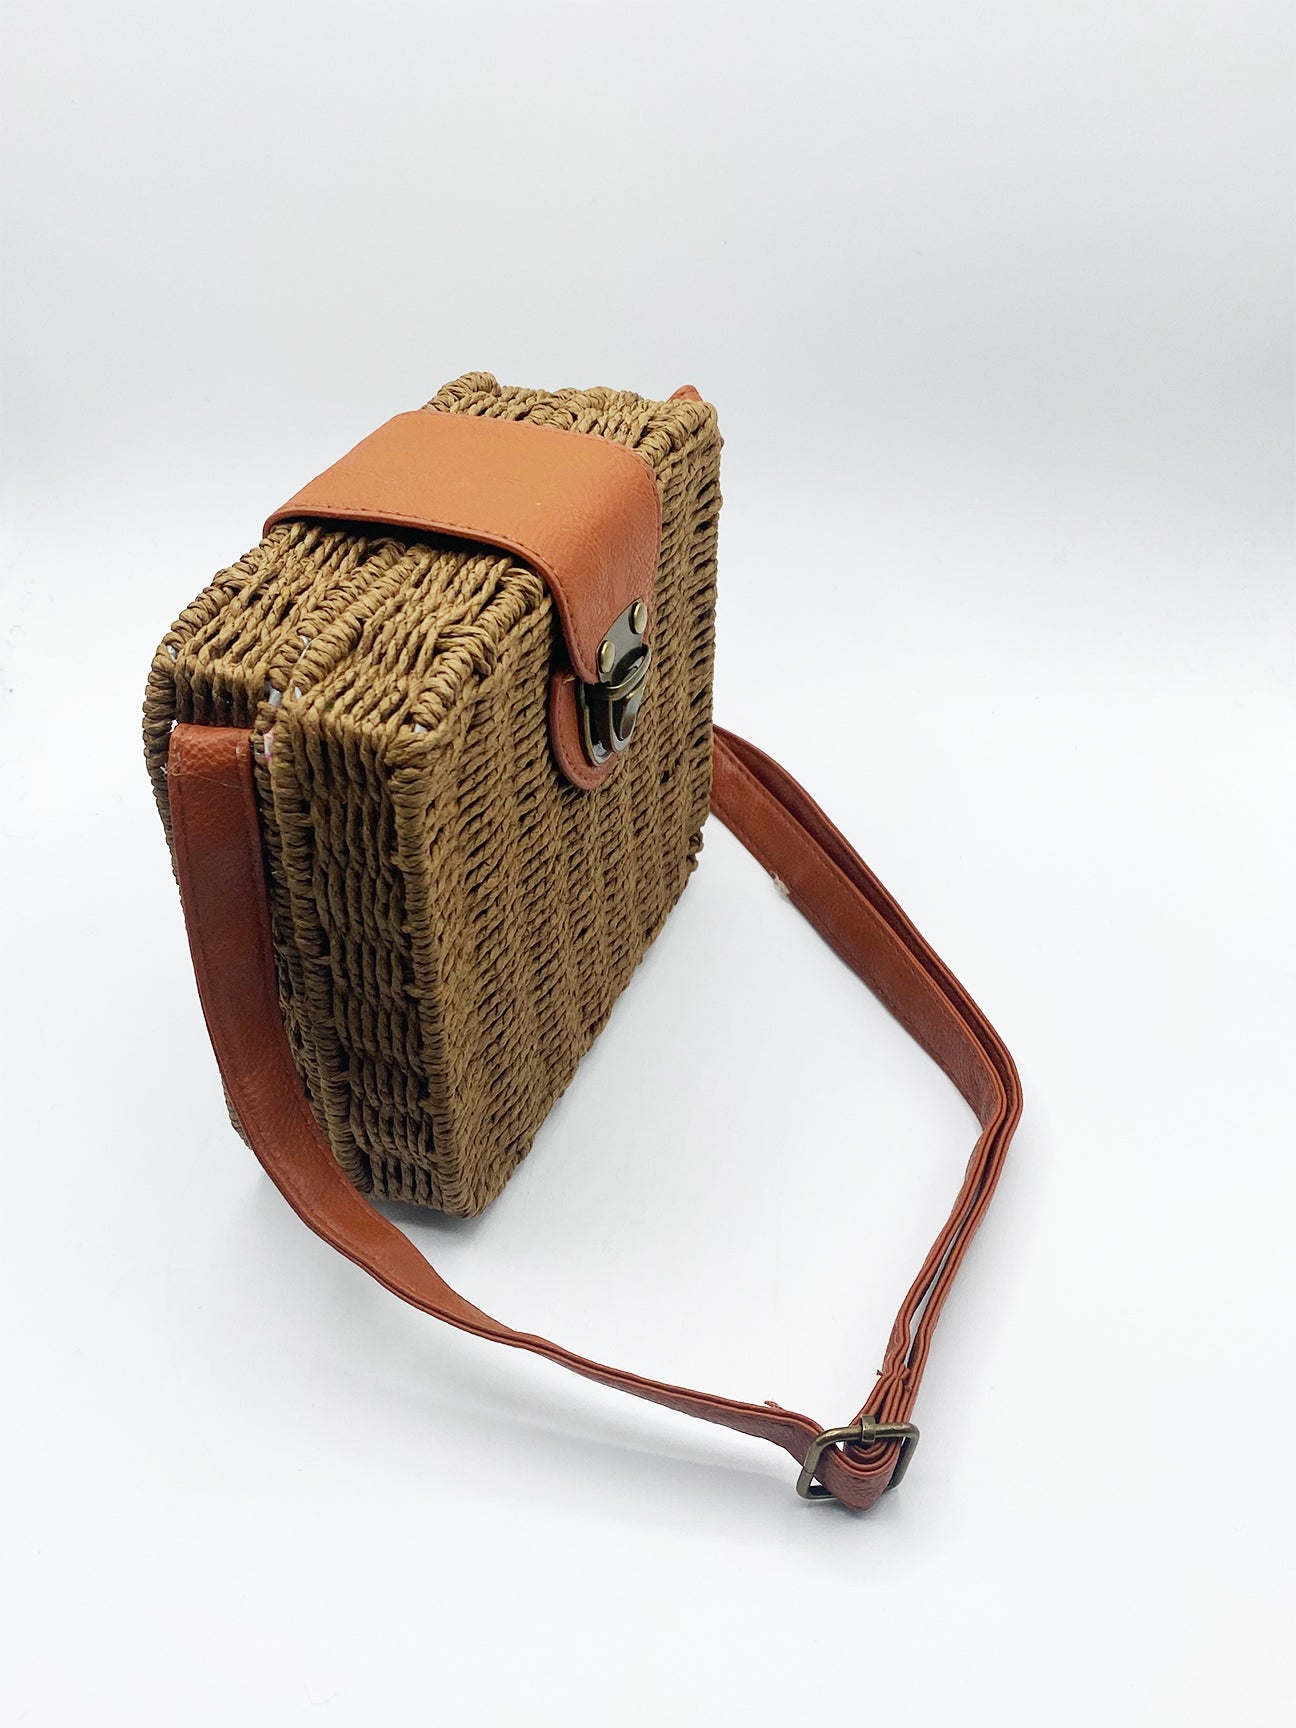 Brown Woven Straw Cross Body Bag with Leather Clasp and Handle